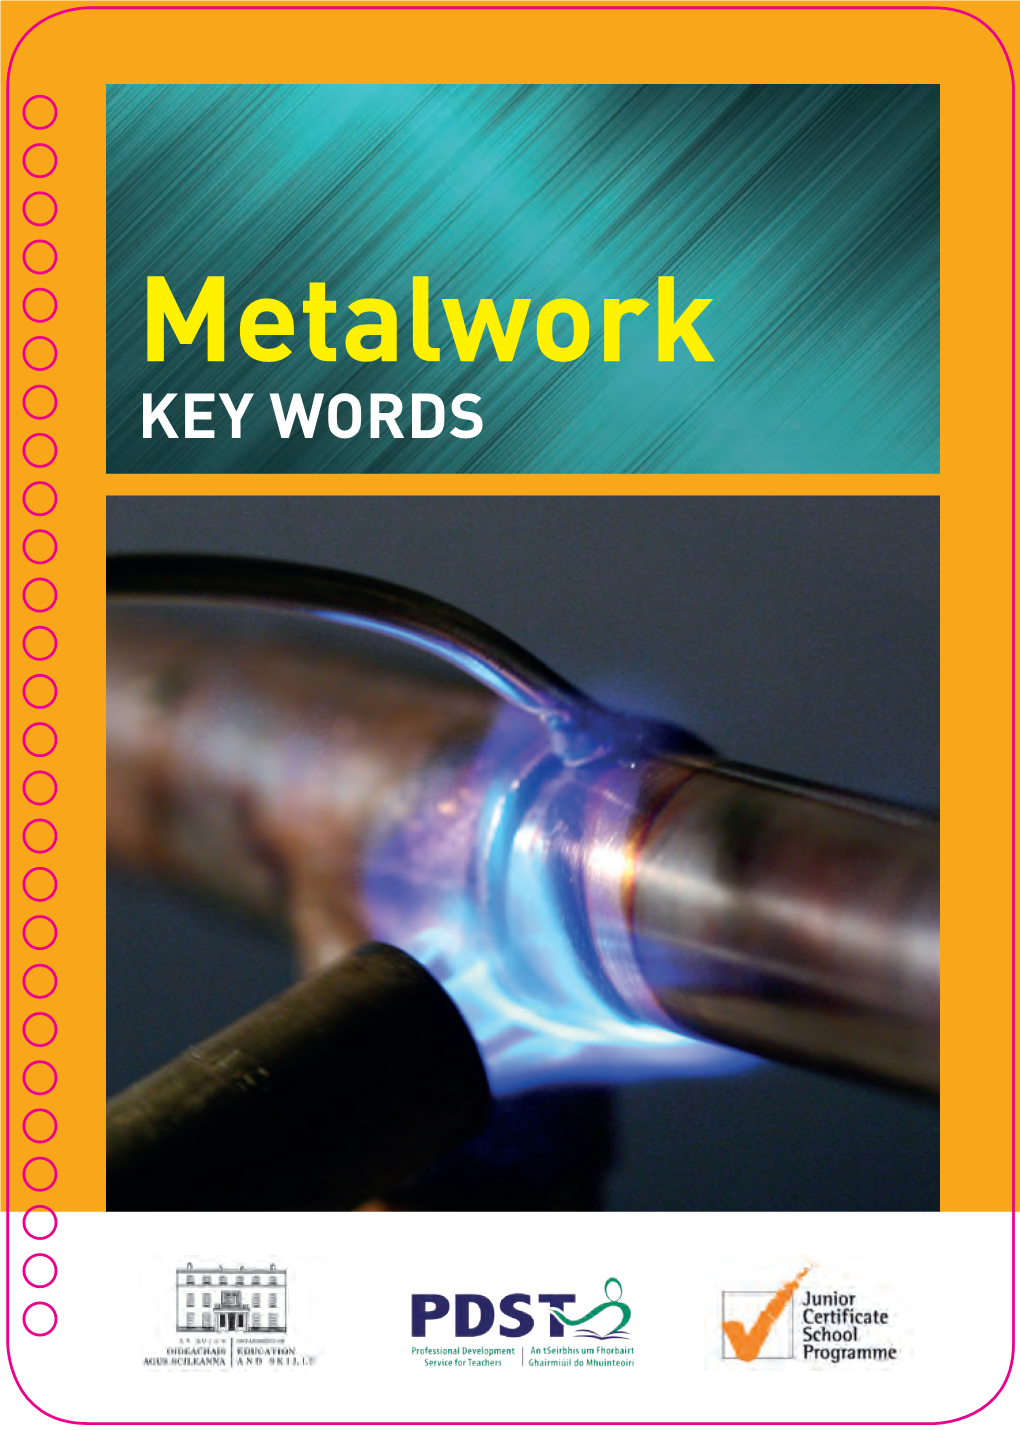 Metalwork KEY WORDS METALWORK KEYWORDS Keywords with Pictures to Trigger Your Memory